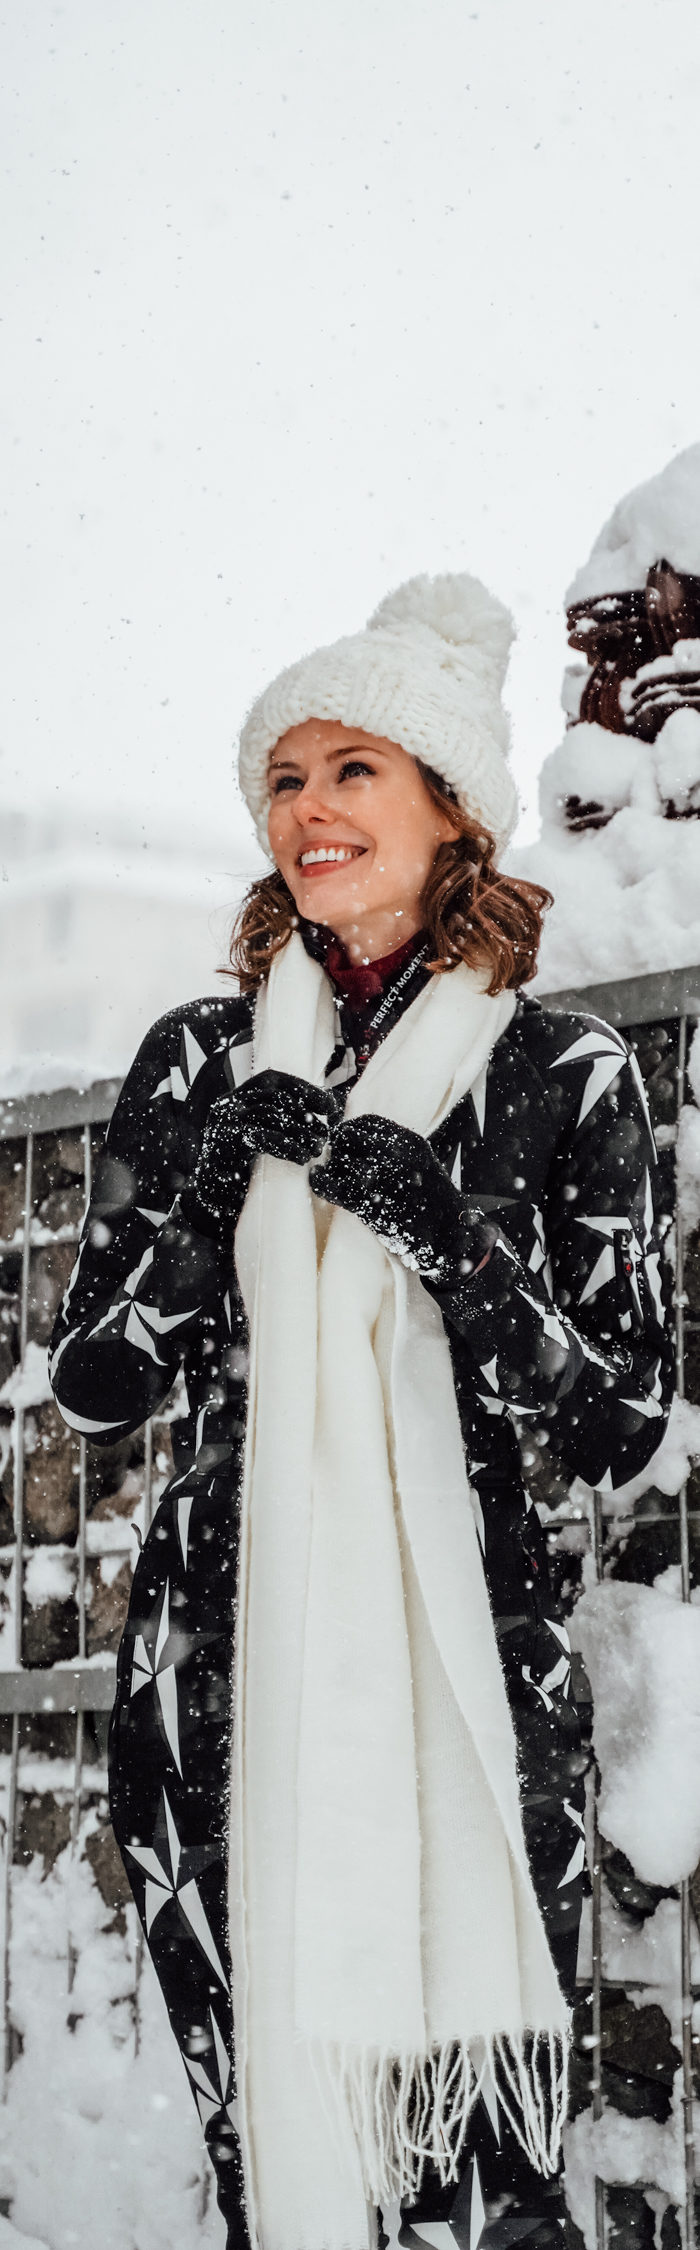 Alyssa Campanella of The A List blog visits Niseko, Japan wearing Perfect Moment star ski suit and Moon Boots